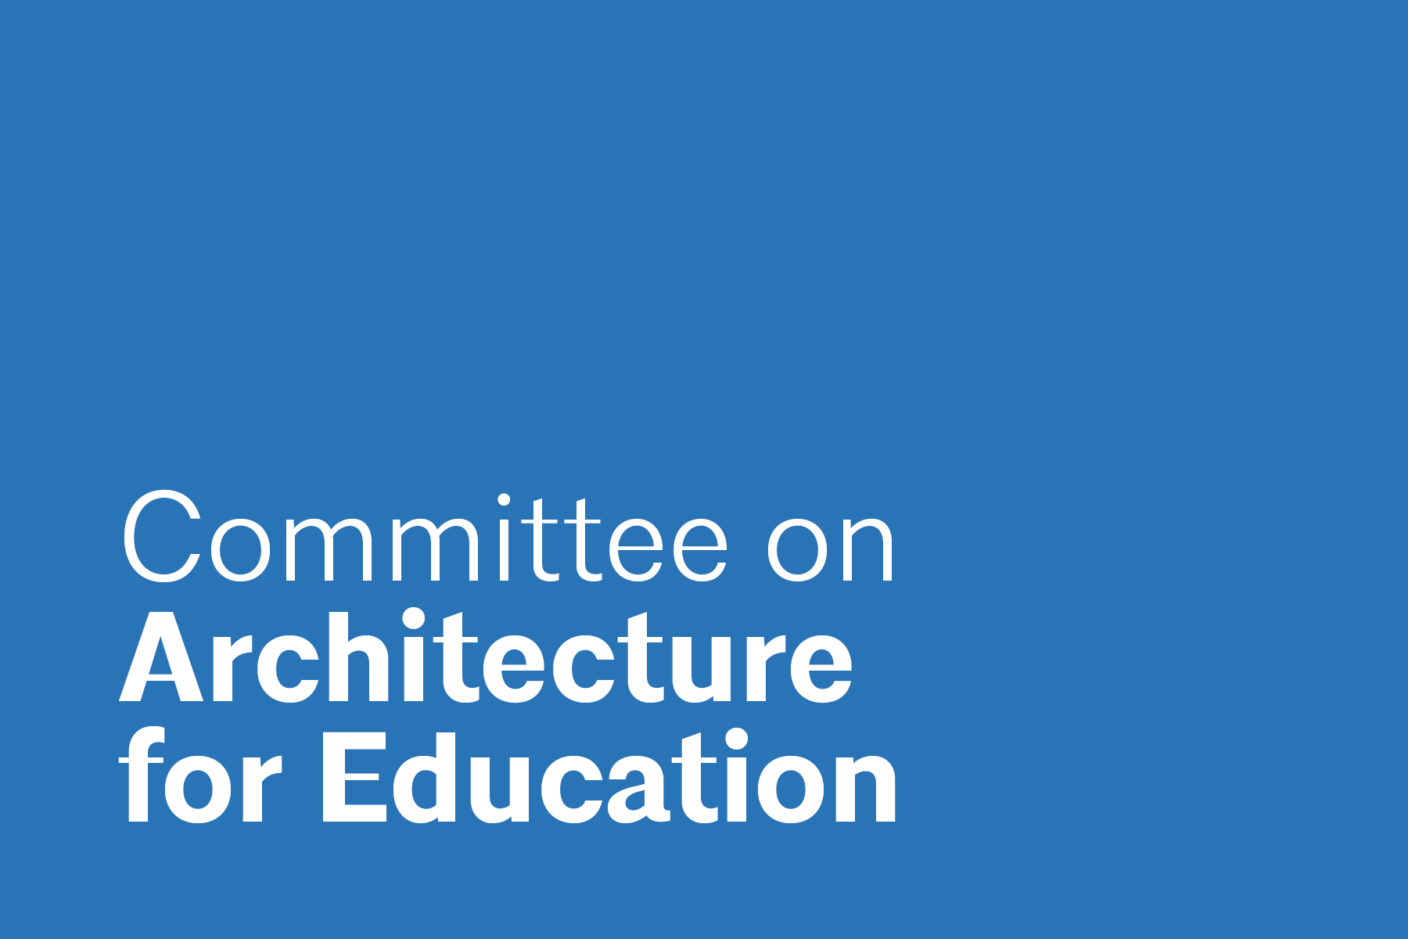 Committee on Architecture for Education (CAE) develops a knowledge sharing network of individuals that impact planning and design of early learning, K-12, higher education, and other learning environments and shares innovative ideas, trends and best practices in education through local events, programs and tours that strengthen relationships between architects, allied organizations, client groups and the public at large.